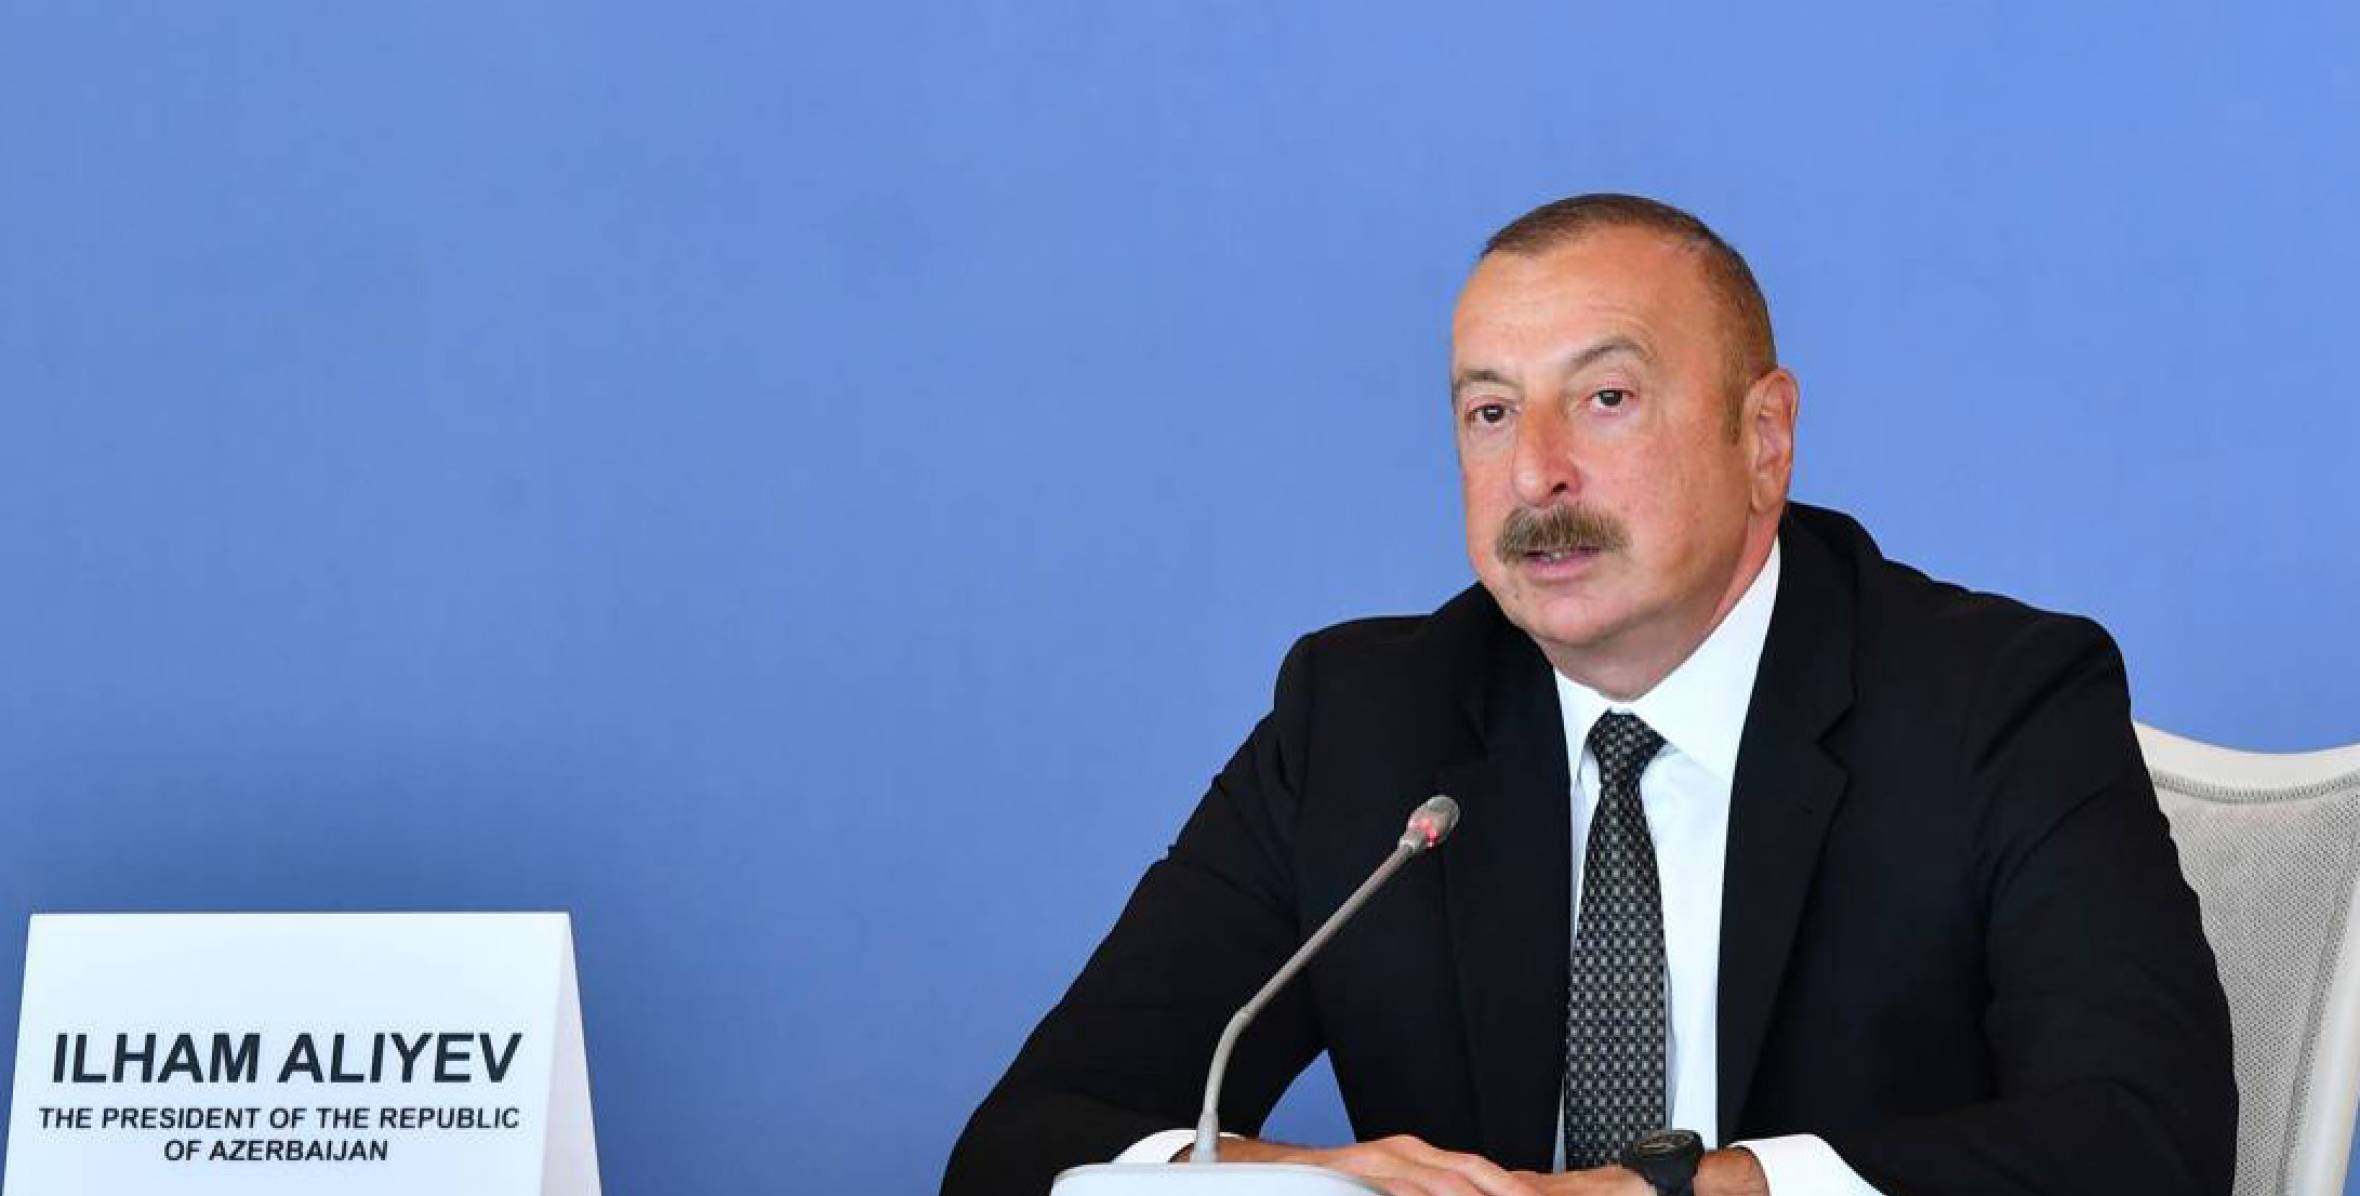 Speech by Ilham Aliyev at the opening ceremony of the IX Global Baku Forum